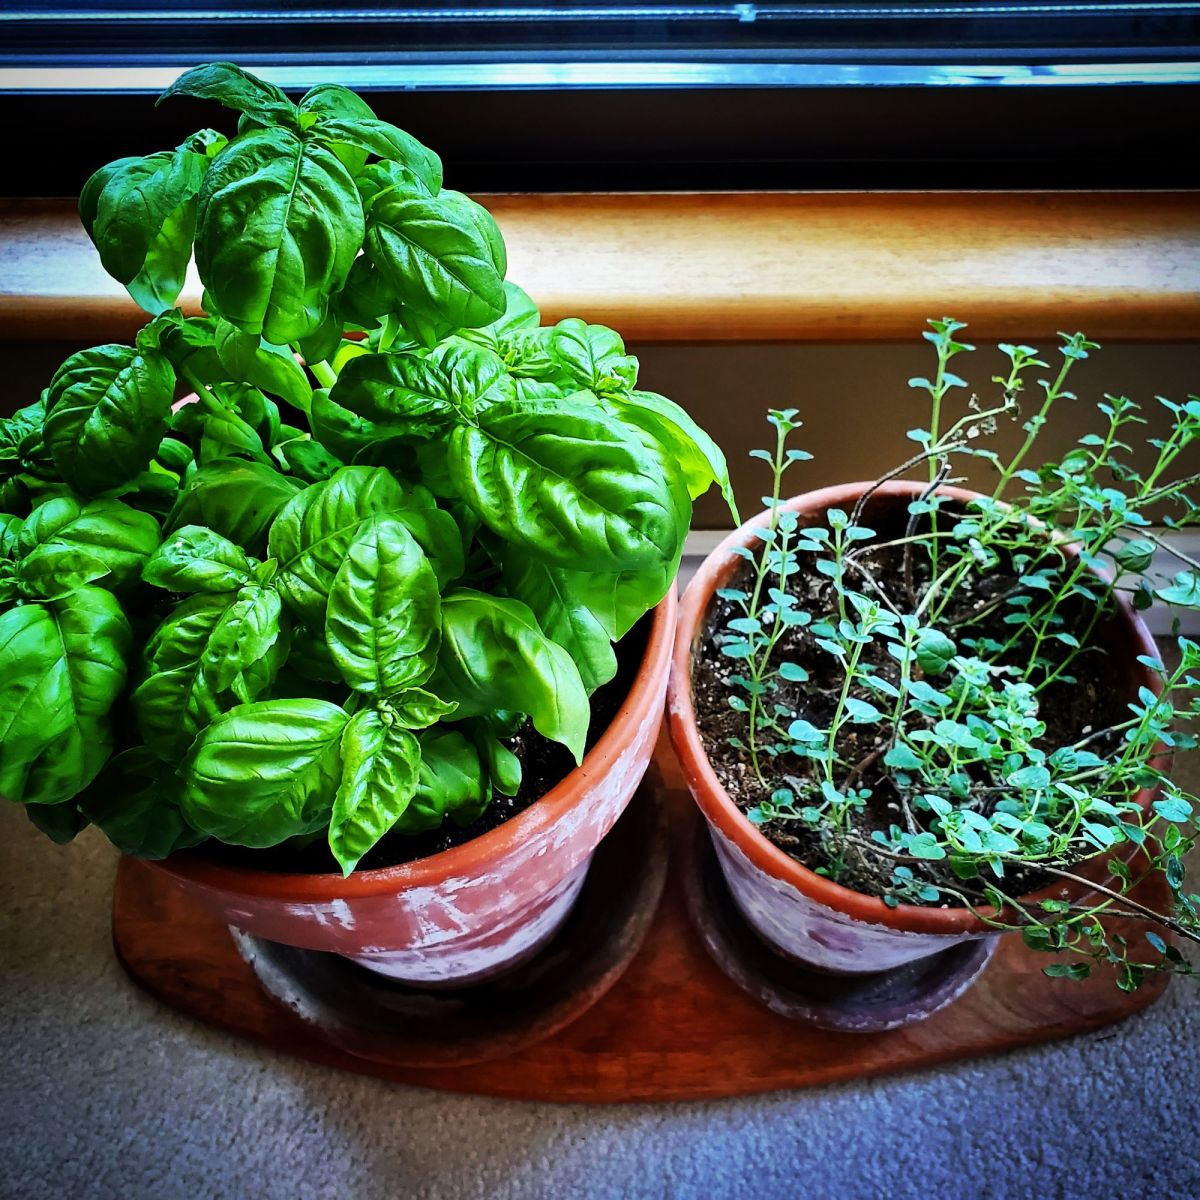 You can never go wrong with using herbs directly from the plant. Your basil and oregano will be fresher and better tasting. Growing the plant also saves money and reduces waste from packaging.